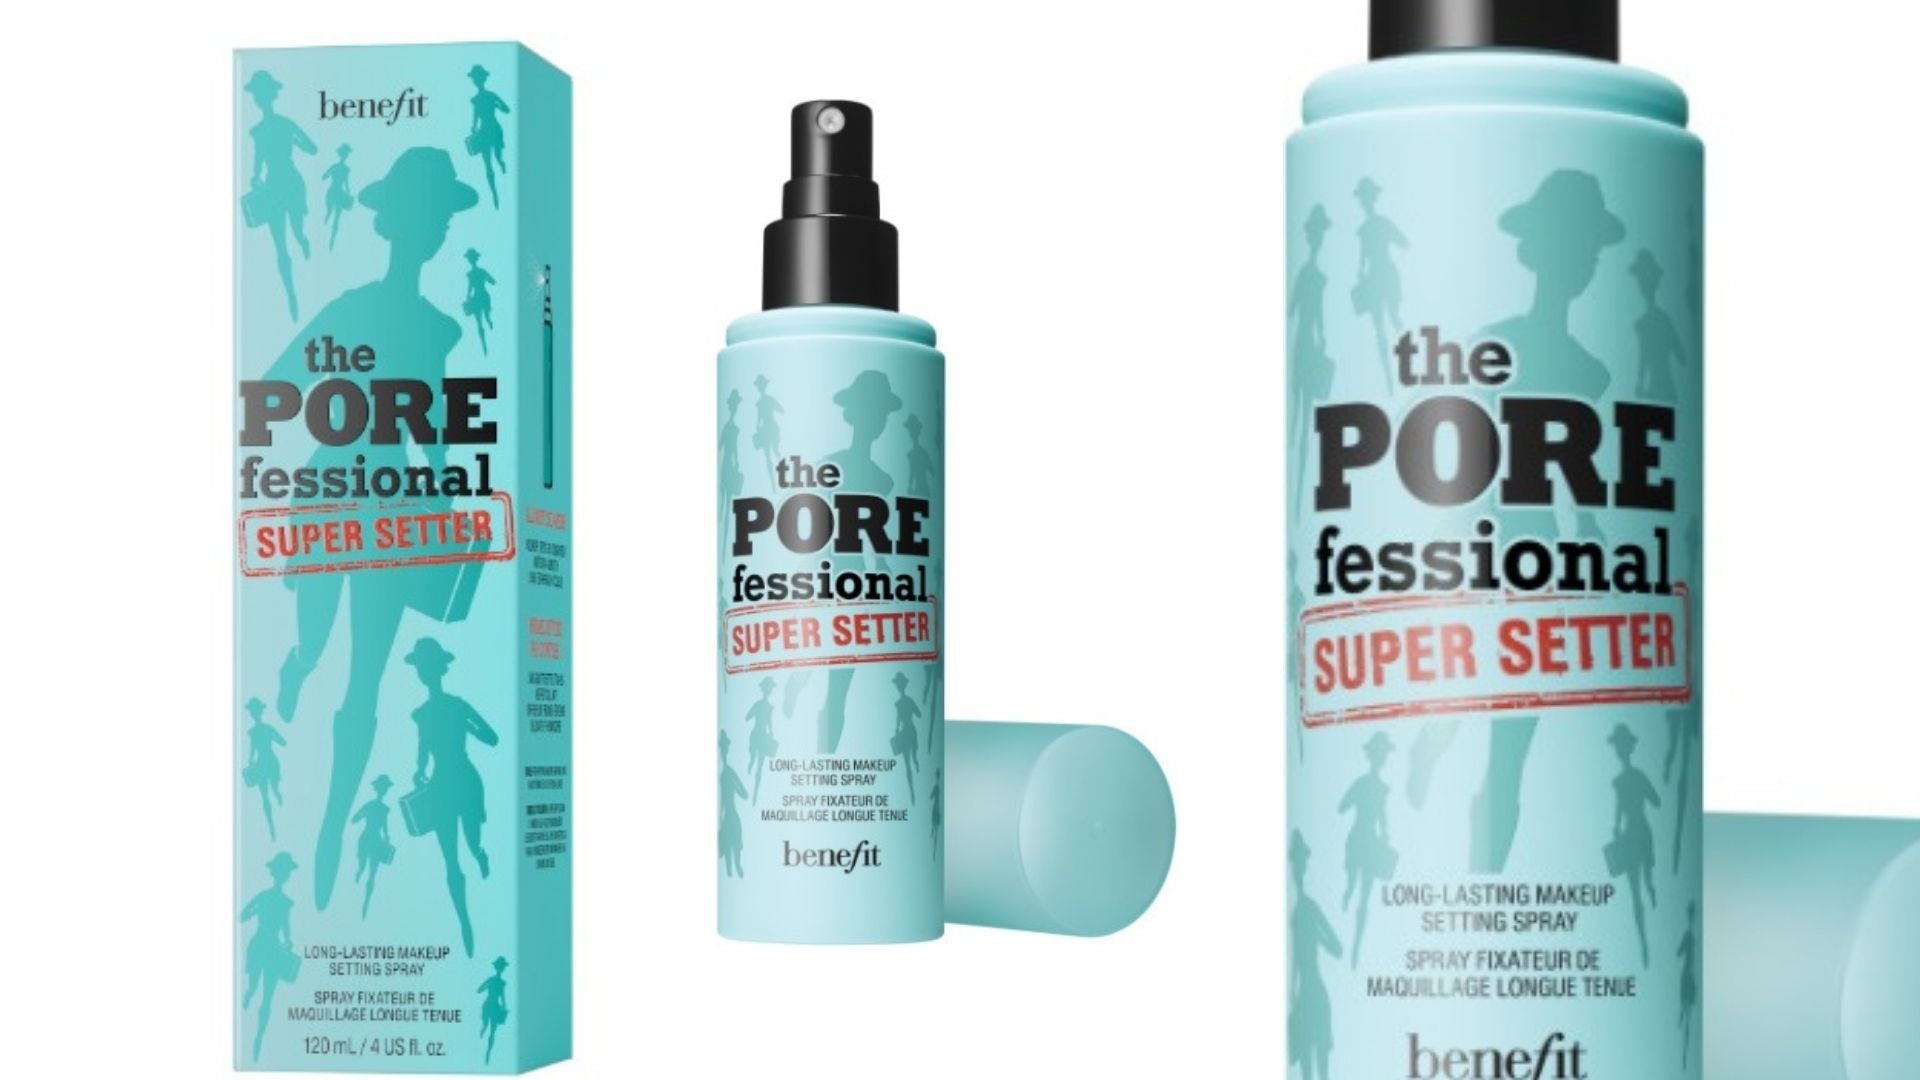 review, photos, ingredients, trends, makeup, 2021, 2022, benefit cosmetics, the porefessional, super setter, setting spray, pore blurring face products, best setting sprays, multitasking makup spray, weightless formula, hydrating setting spray